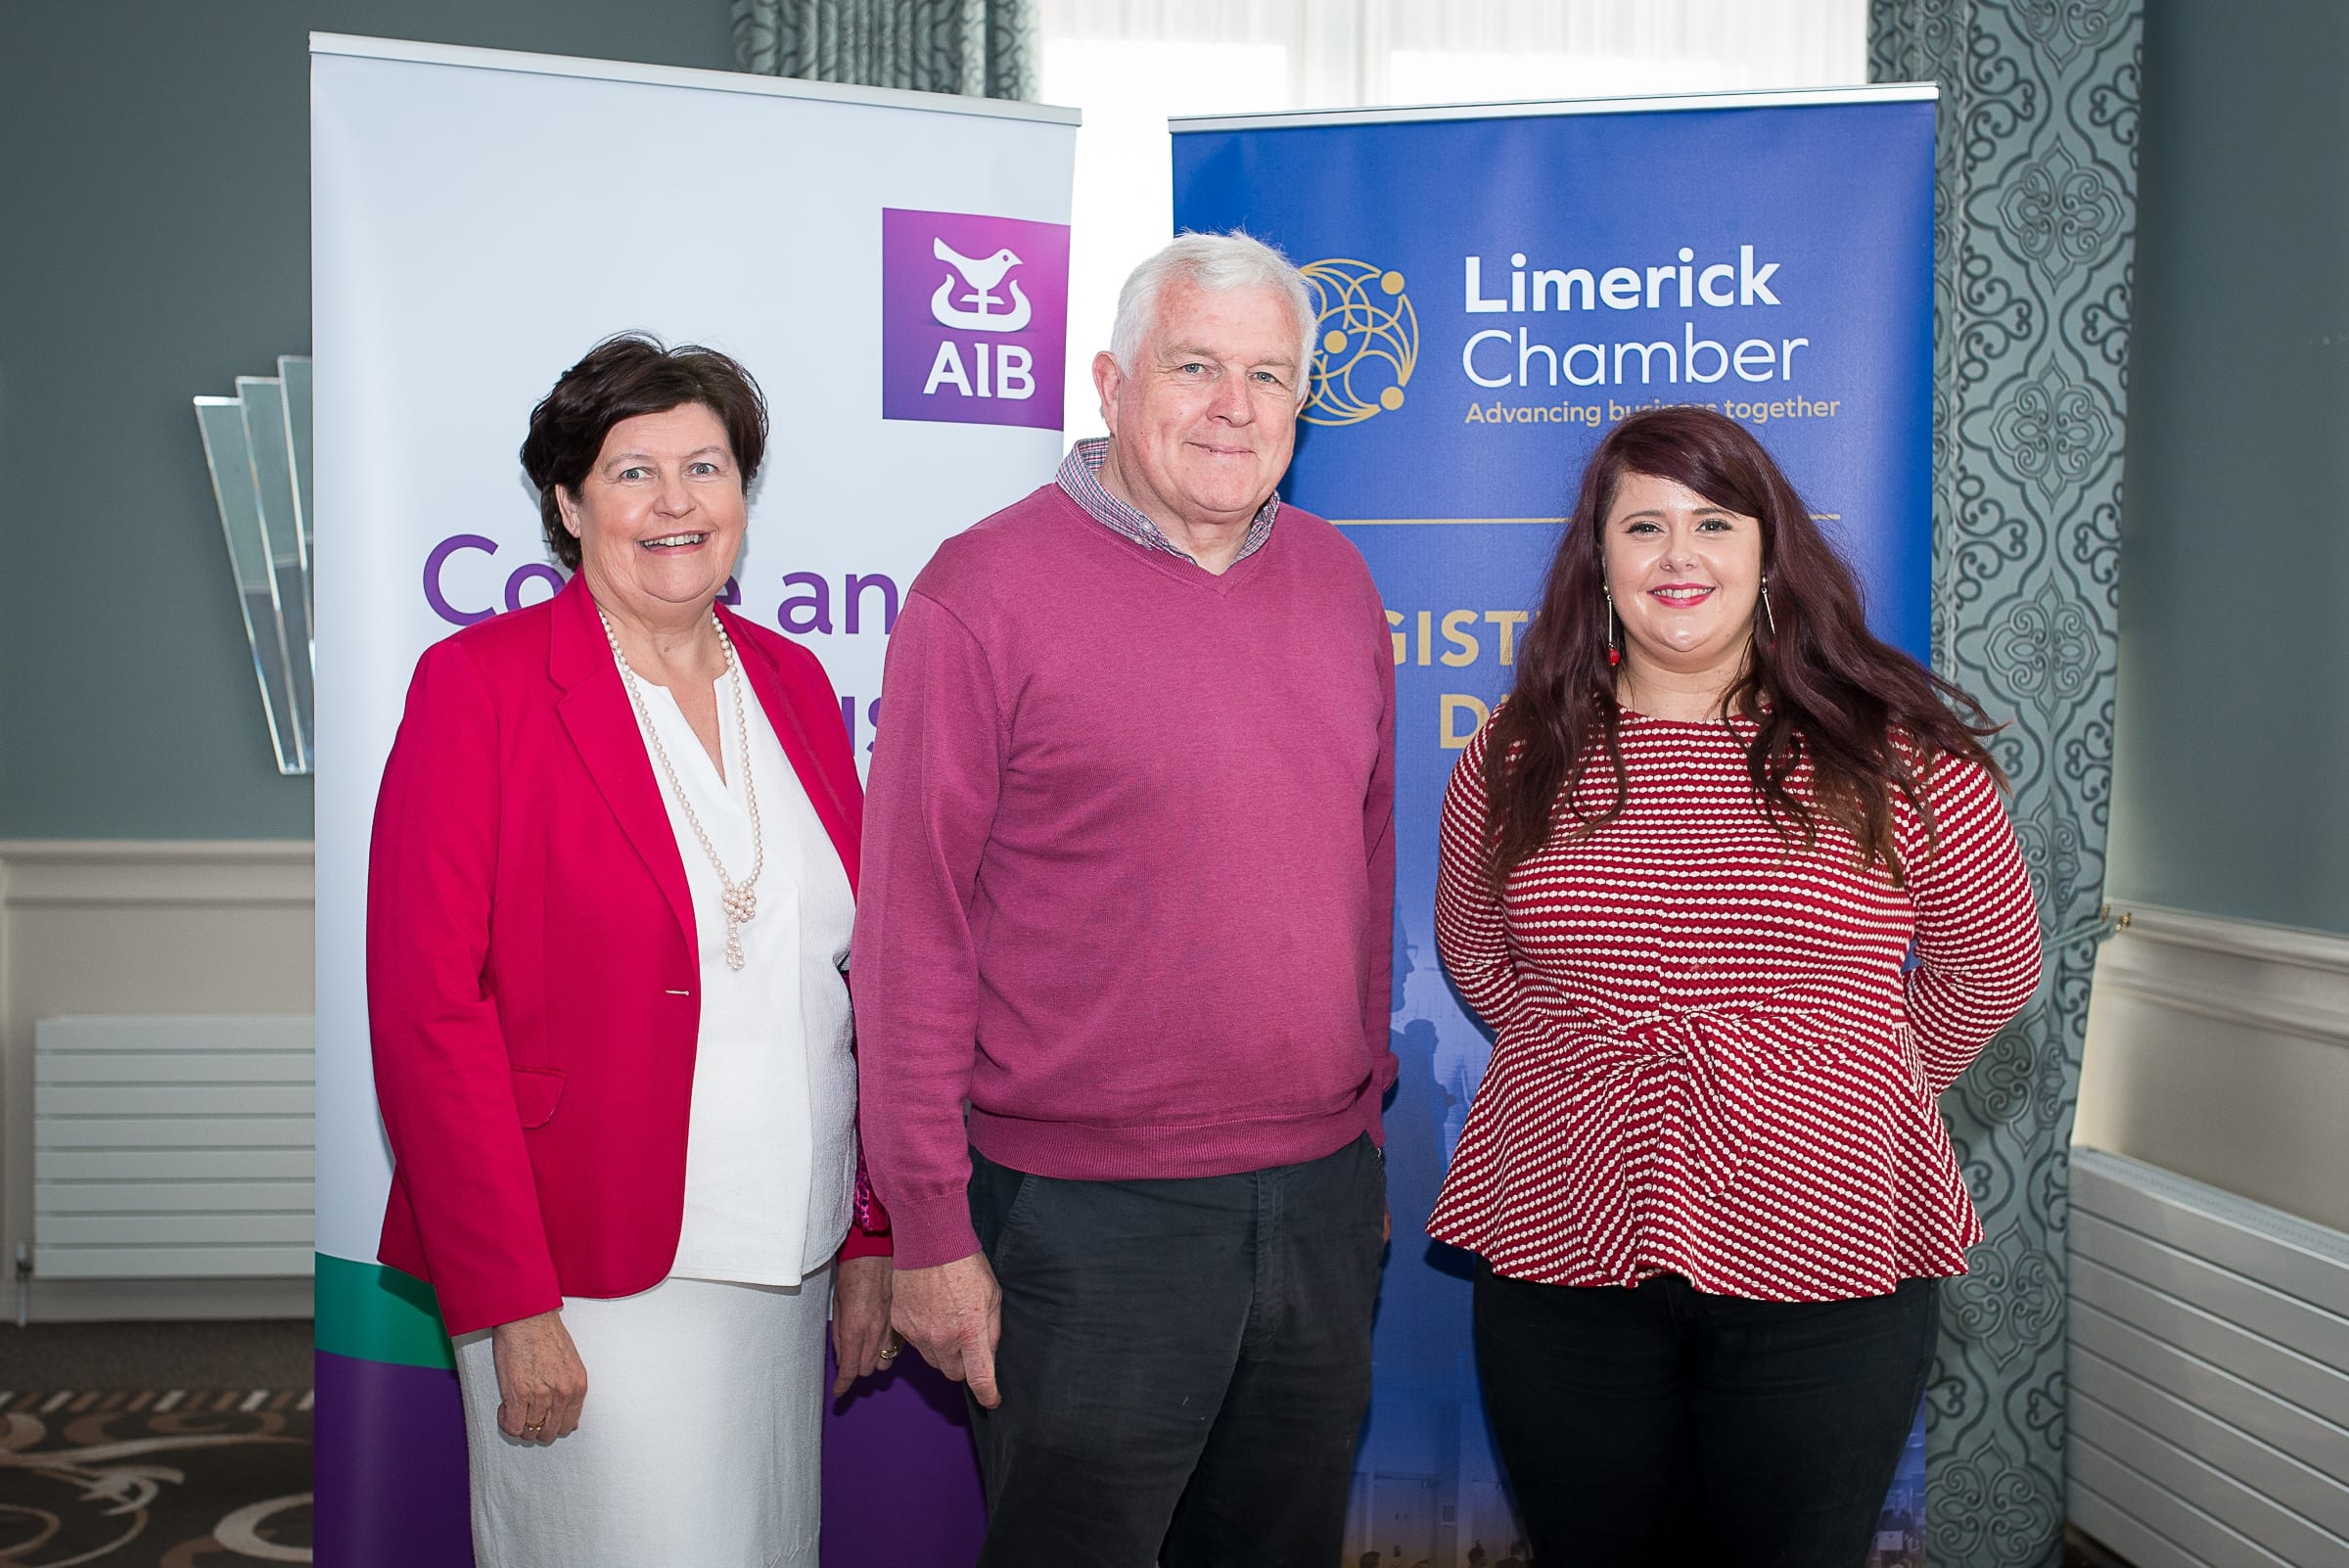 From left to right Agri Tourism Event Newcastlewest which took place on the 29th April in The Longcourt House Hotel: Mary Danaher - IBT, Donal Fitzgibbon, Caoimhe Moloney - Limerick Chamber.